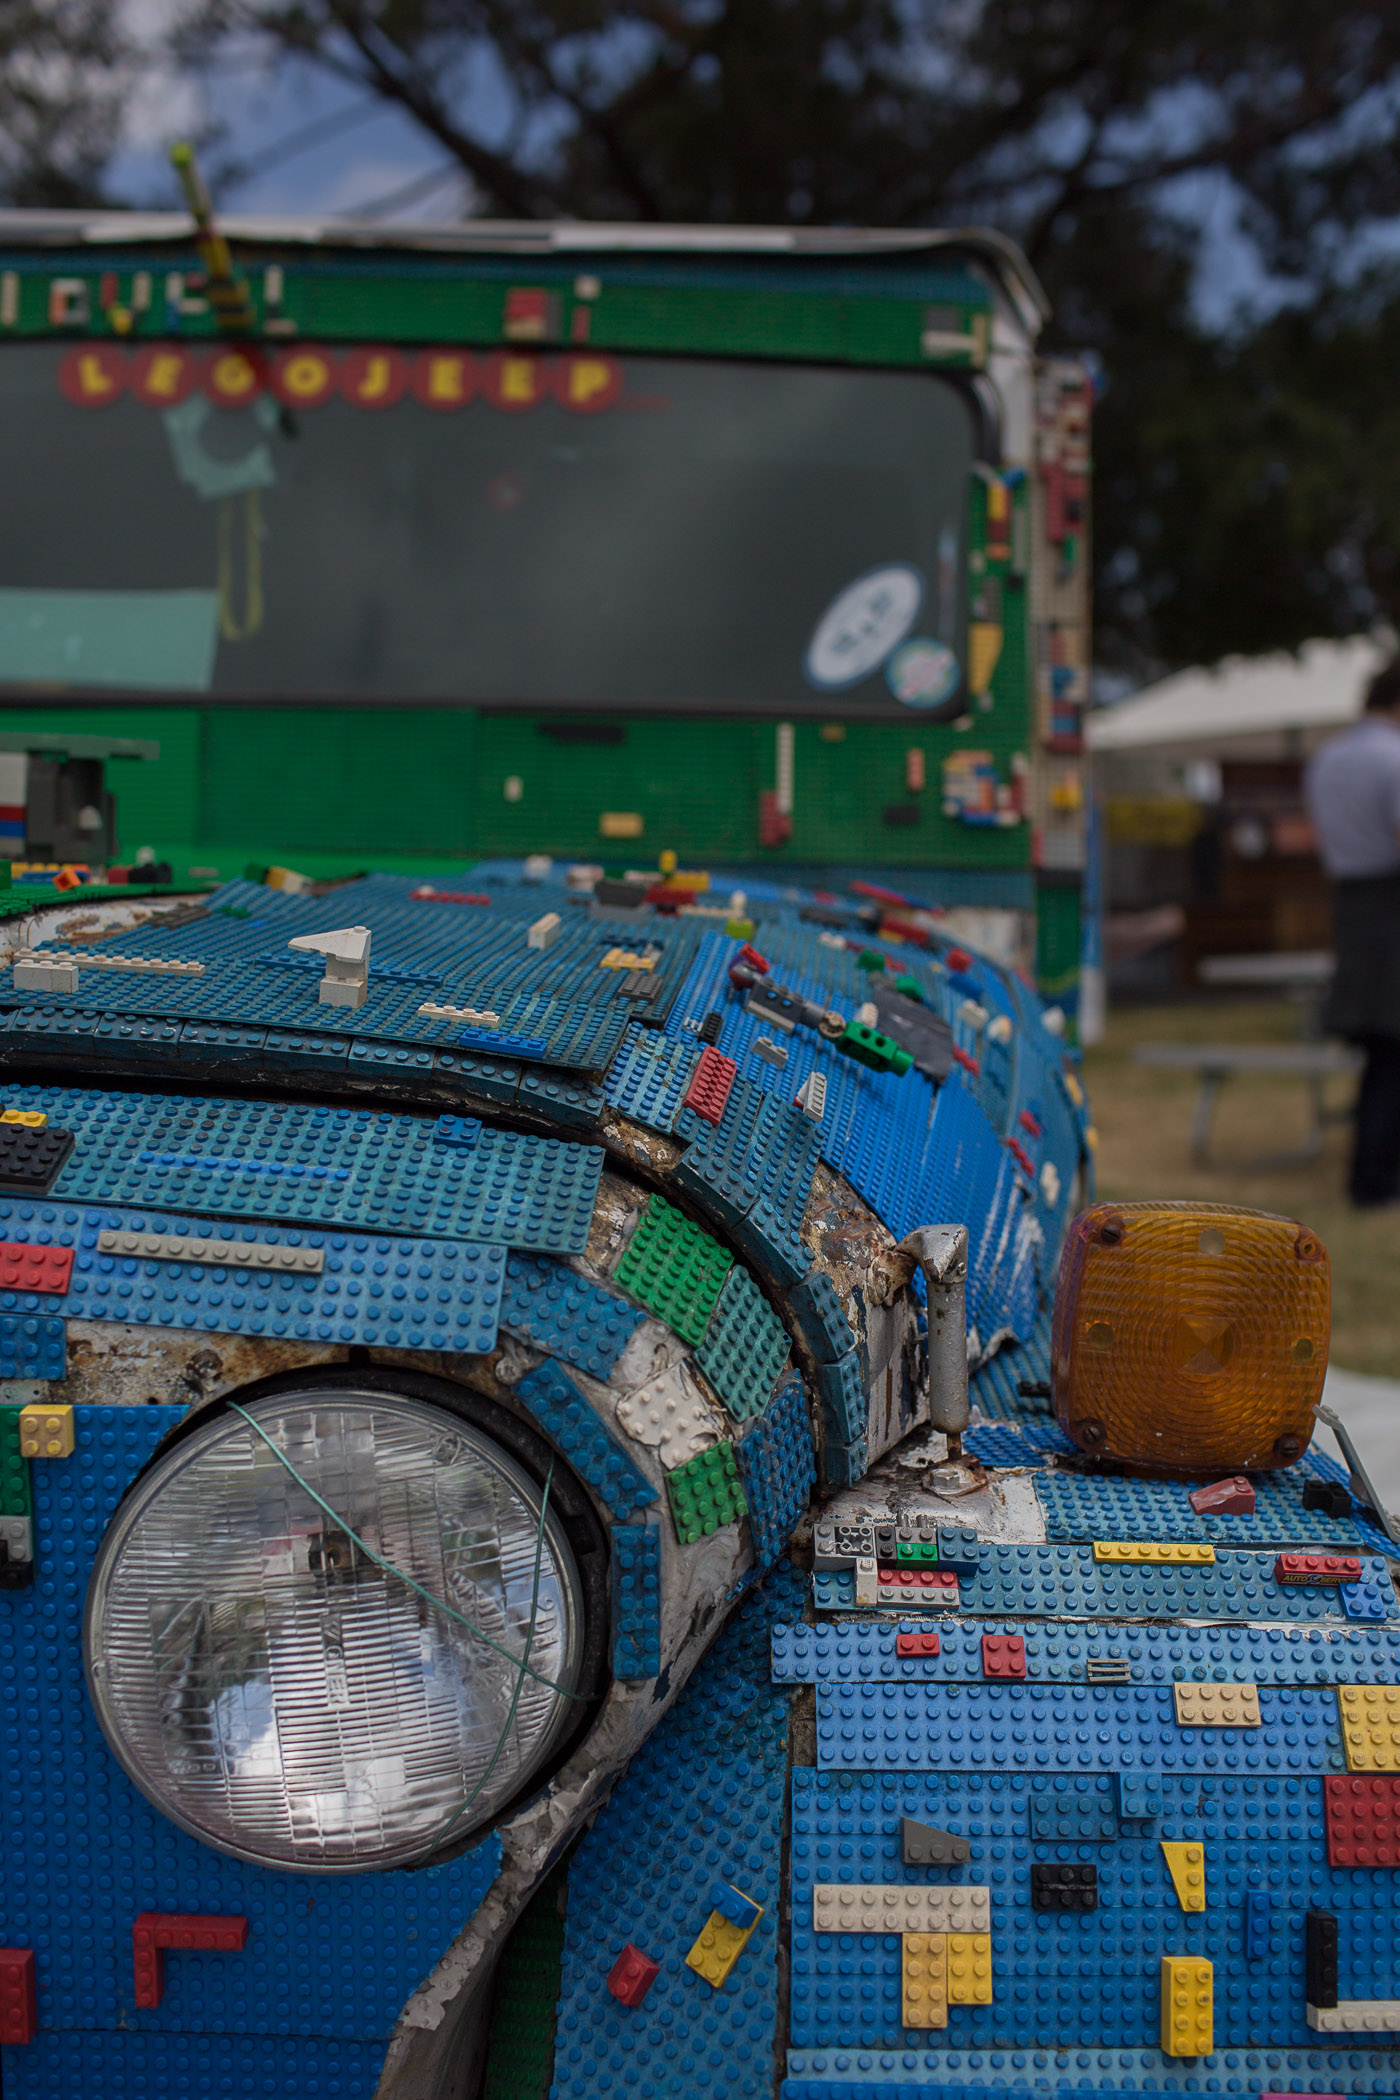 Lego Jeep at Maker Faire 2015